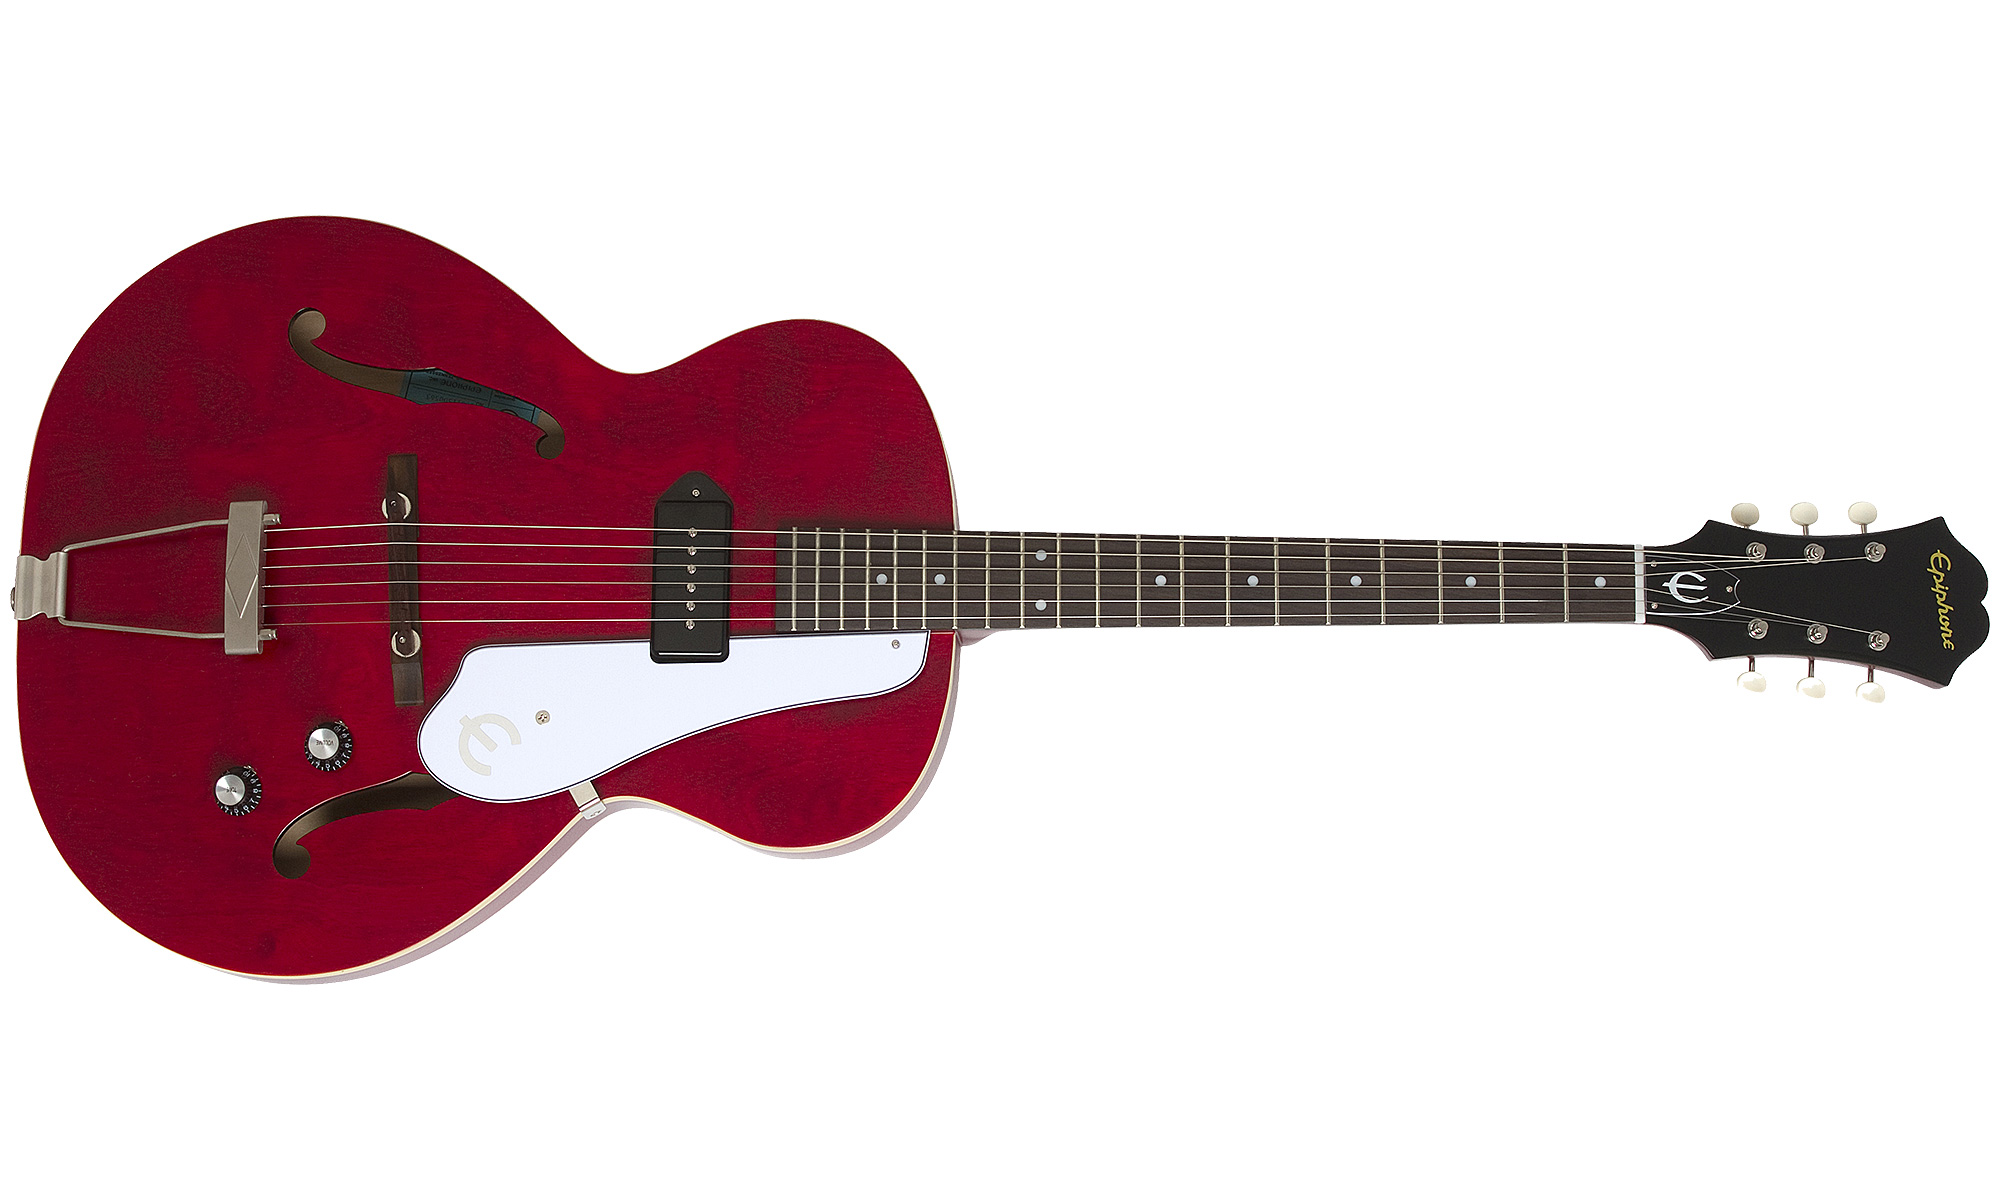 Epiphone Inspired By 1966 Century 2016 - Aged Gloss Cherry - Guitare Électrique 1/2 Caisse - Variation 1